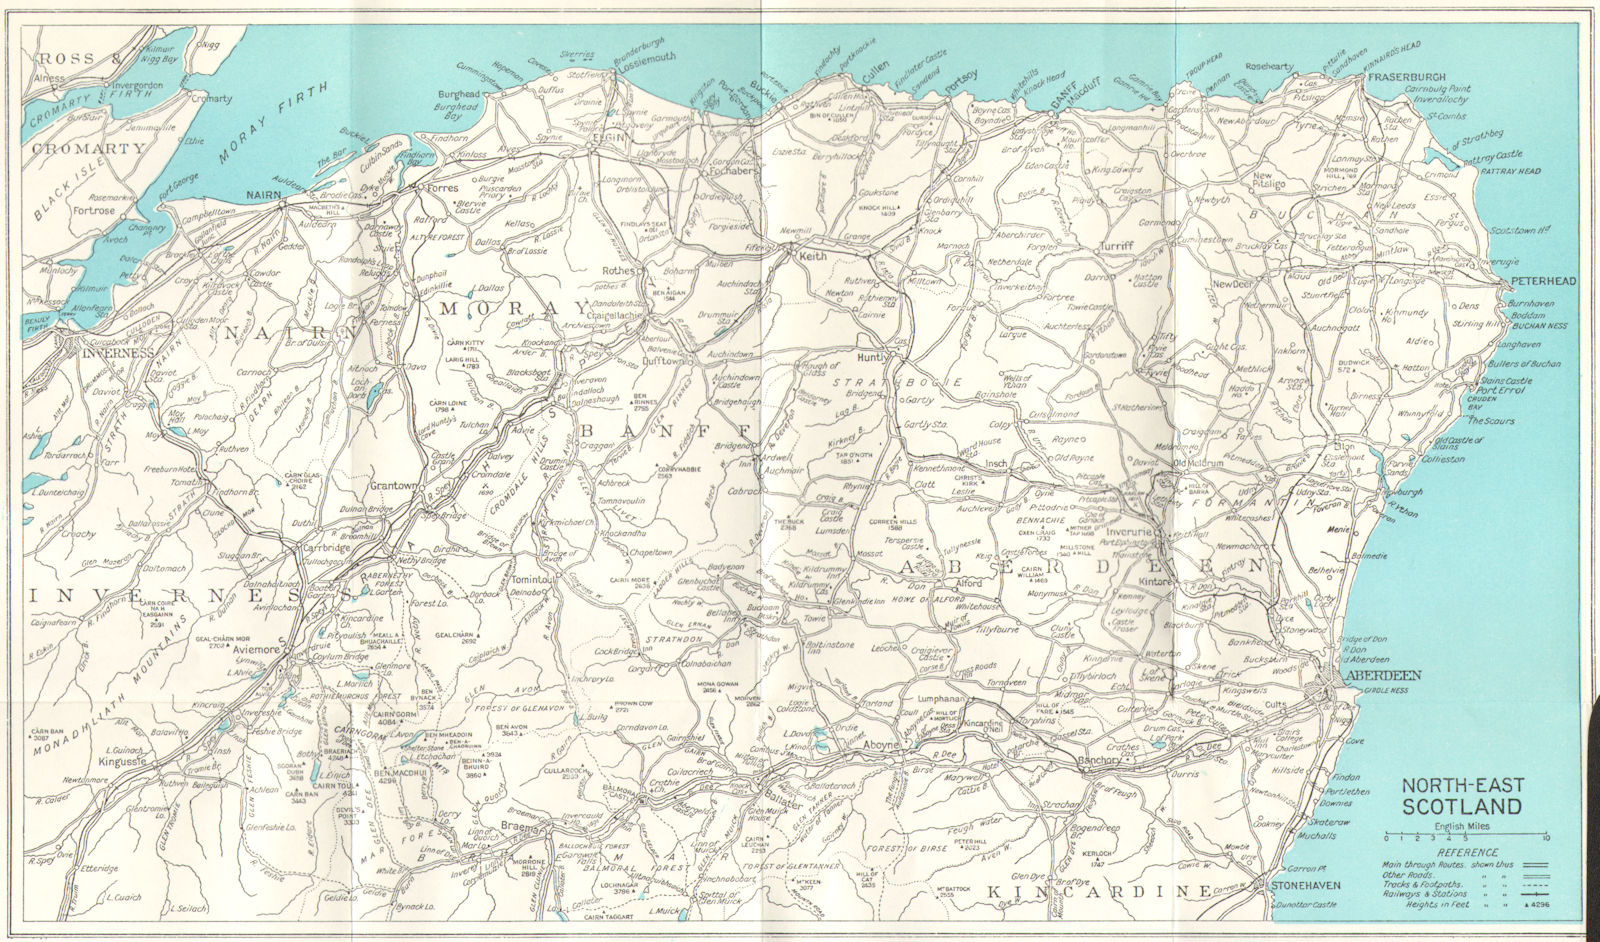 NORTH EAST SCOTLAND. Aberdeen Inverness Banff Moray Nairn Elgin 1964 old map